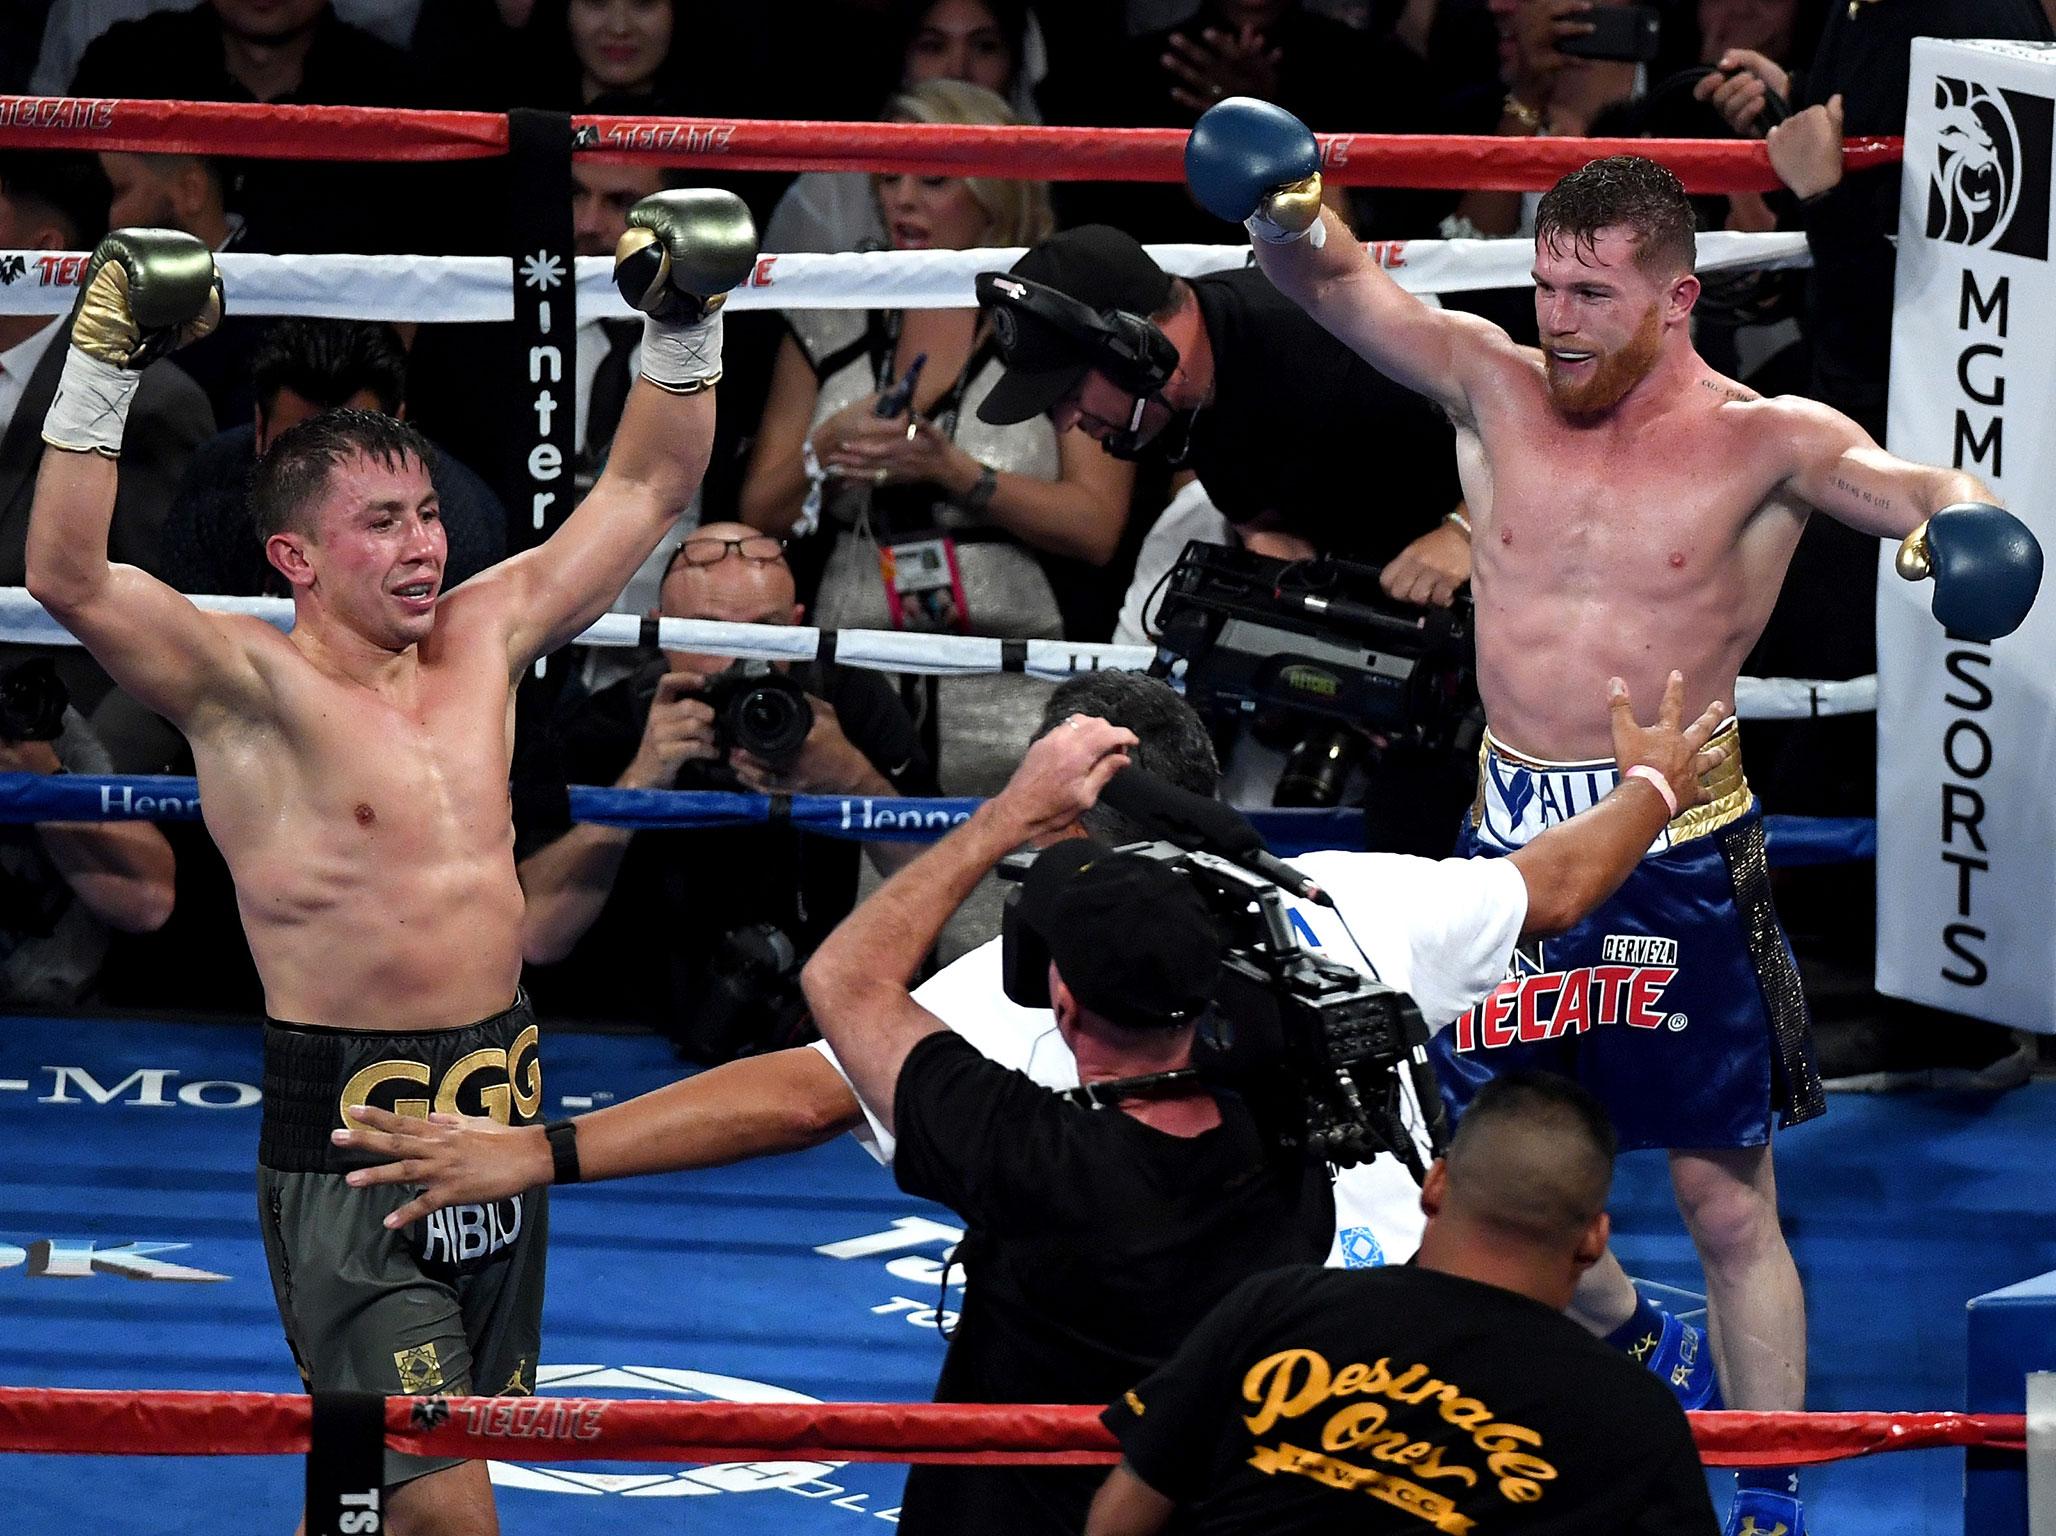 Golovkin appeared to do enough to earn the victory